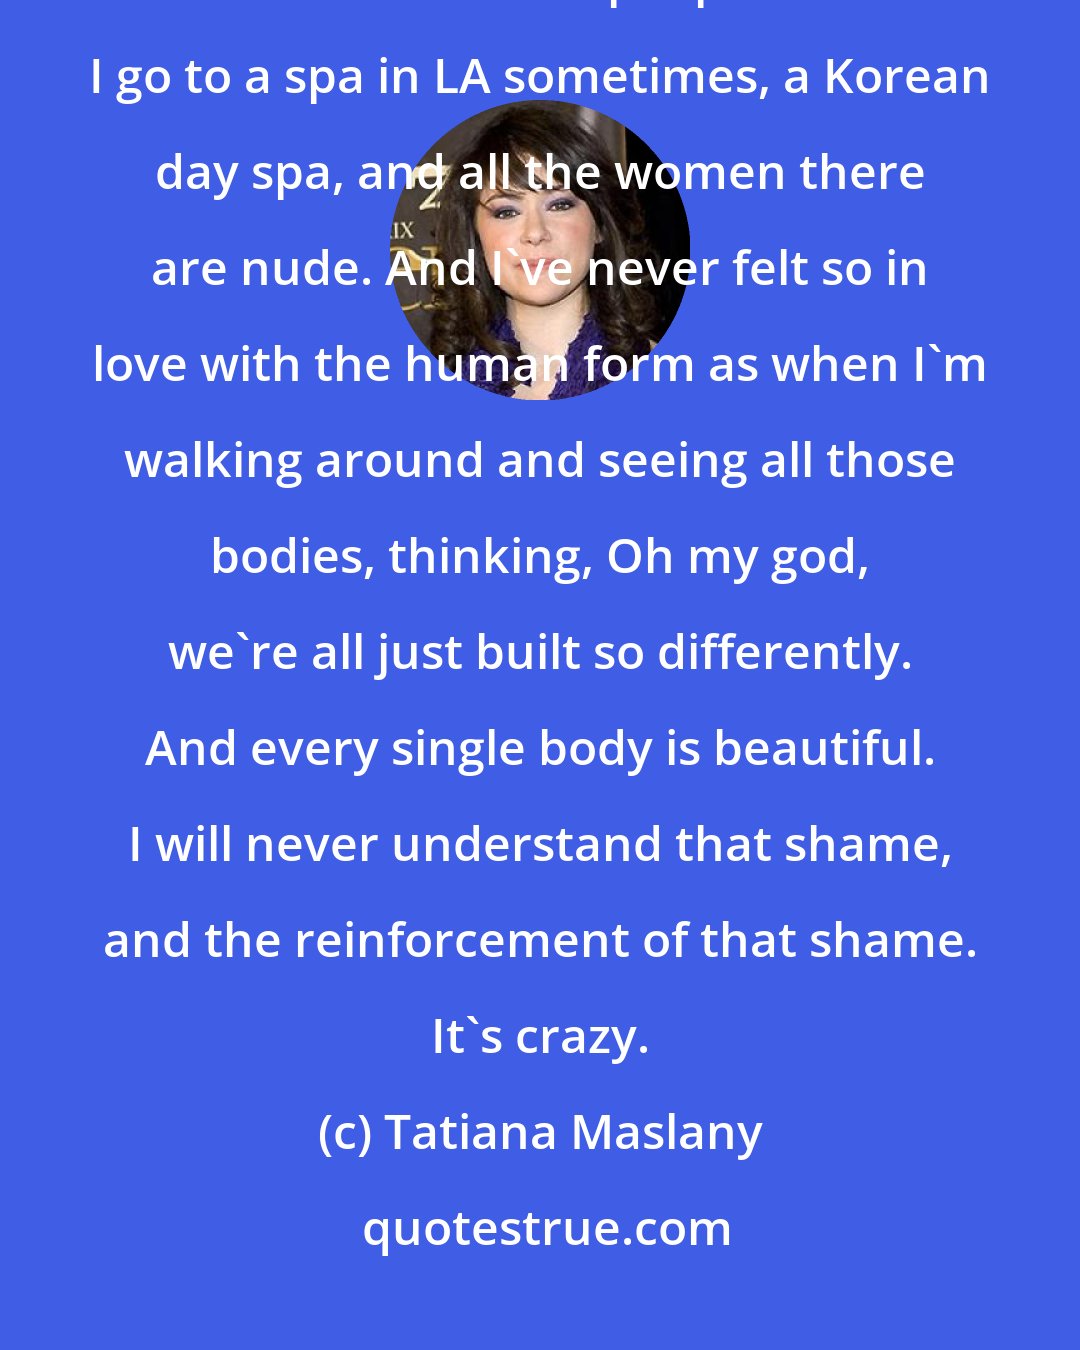 Tatiana Maslany: I'll never, never understand why people think it's their business to comment on other people's bodies. I go to a spa in LA sometimes, a Korean day spa, and all the women there are nude. And I've never felt so in love with the human form as when I'm walking around and seeing all those bodies, thinking, Oh my god, we're all just built so differently. And every single body is beautiful. I will never understand that shame, and the reinforcement of that shame. It's crazy.